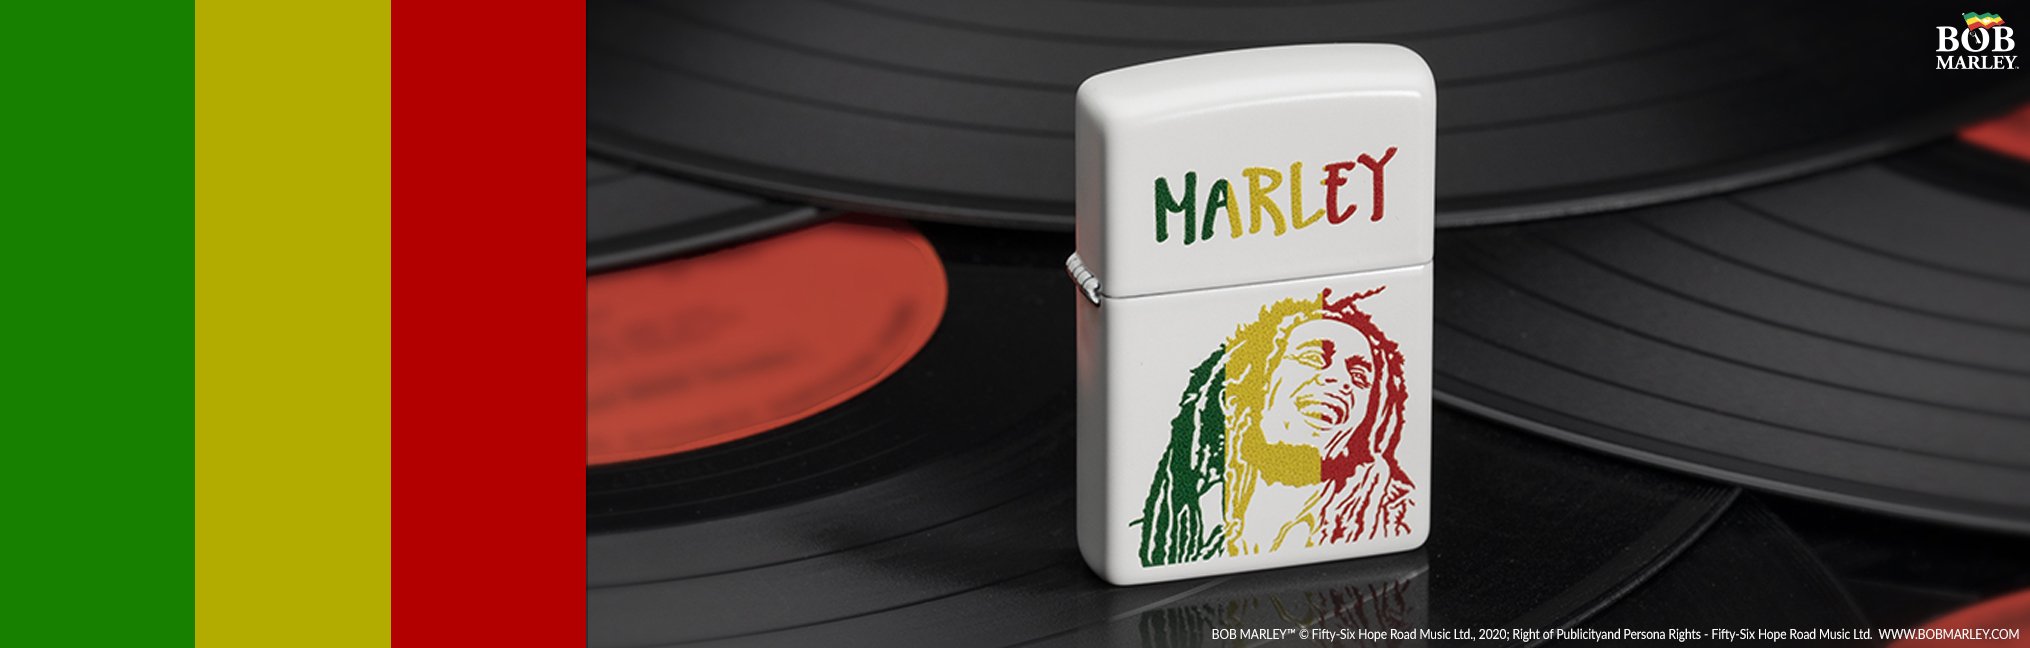 Banner for the Bob Marley collection